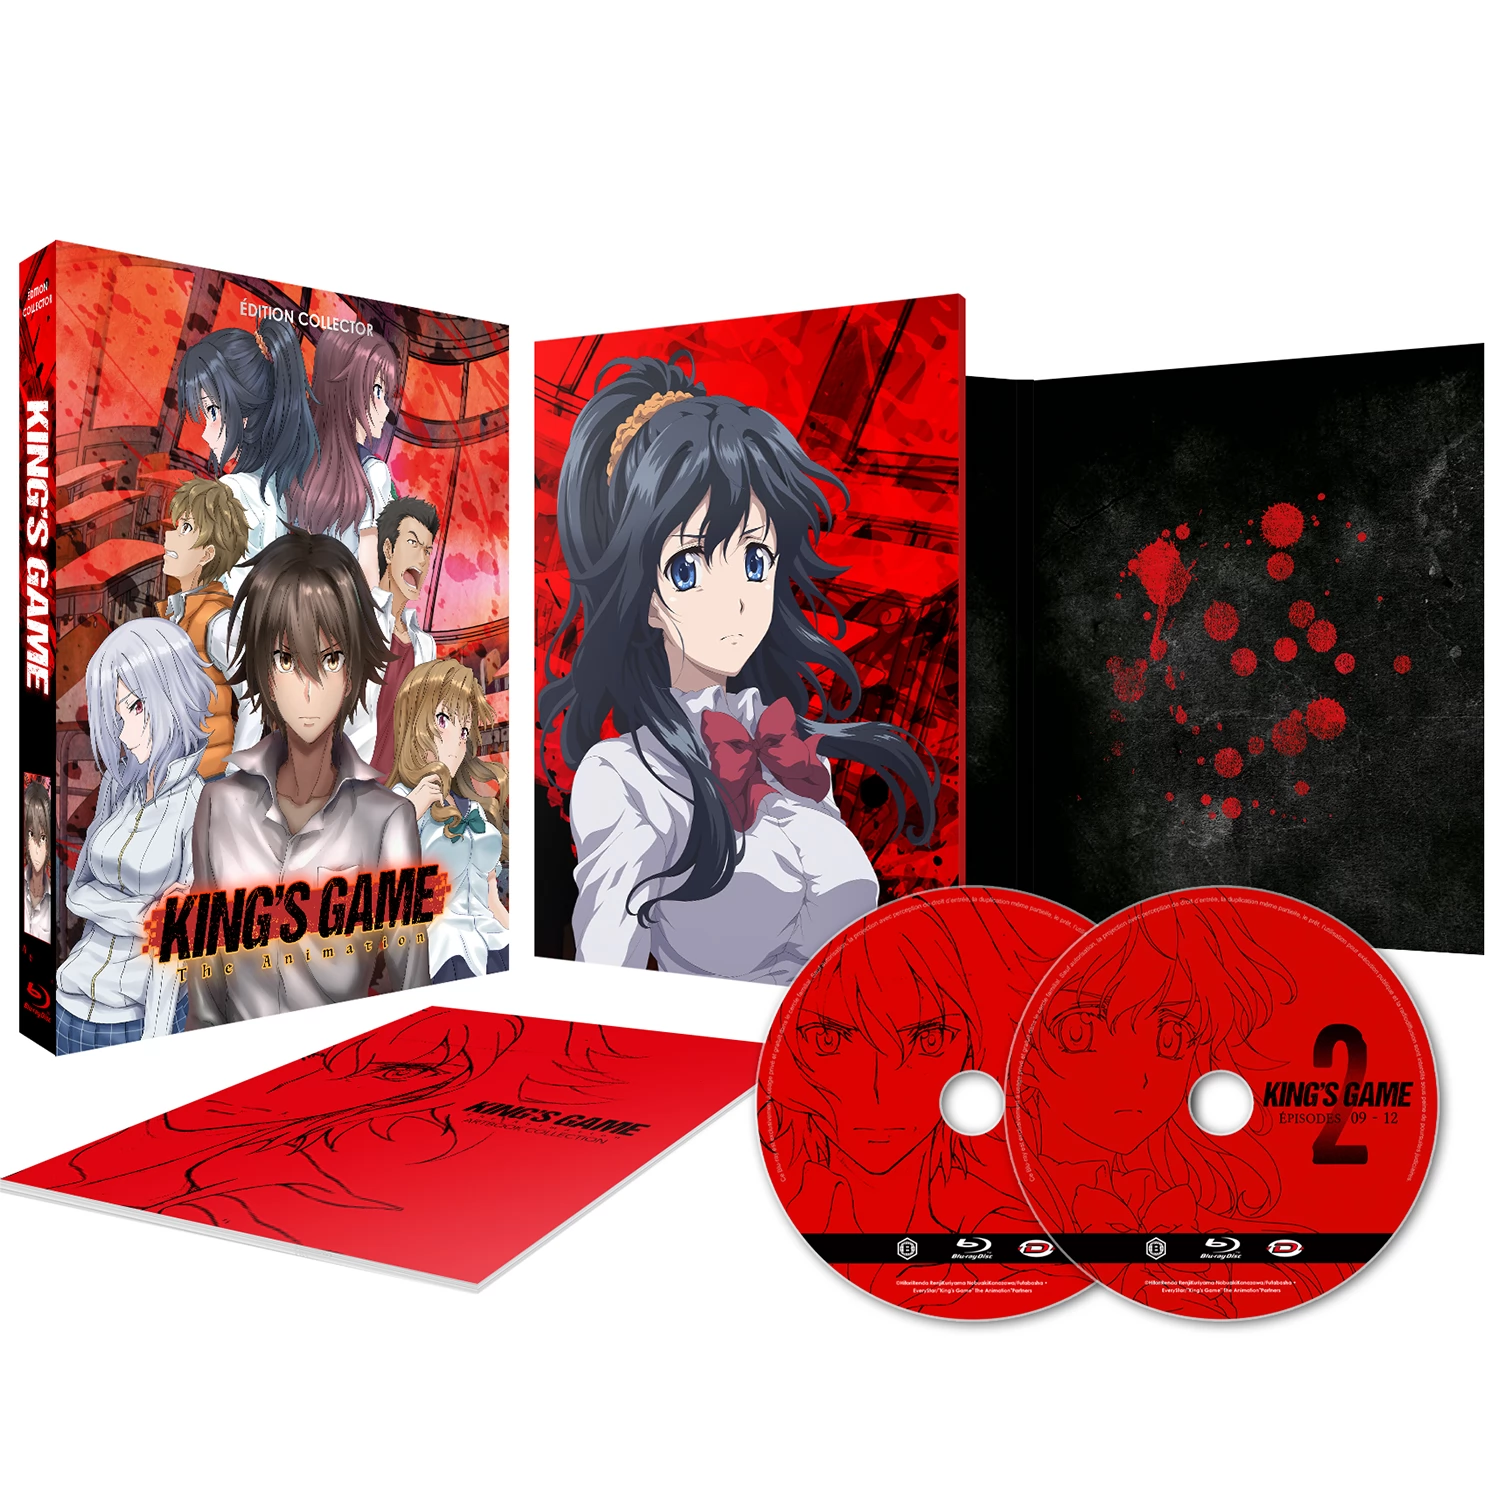 King's Game - Intégrale - Edition Collector - Coffret Blu-ray | Anime 